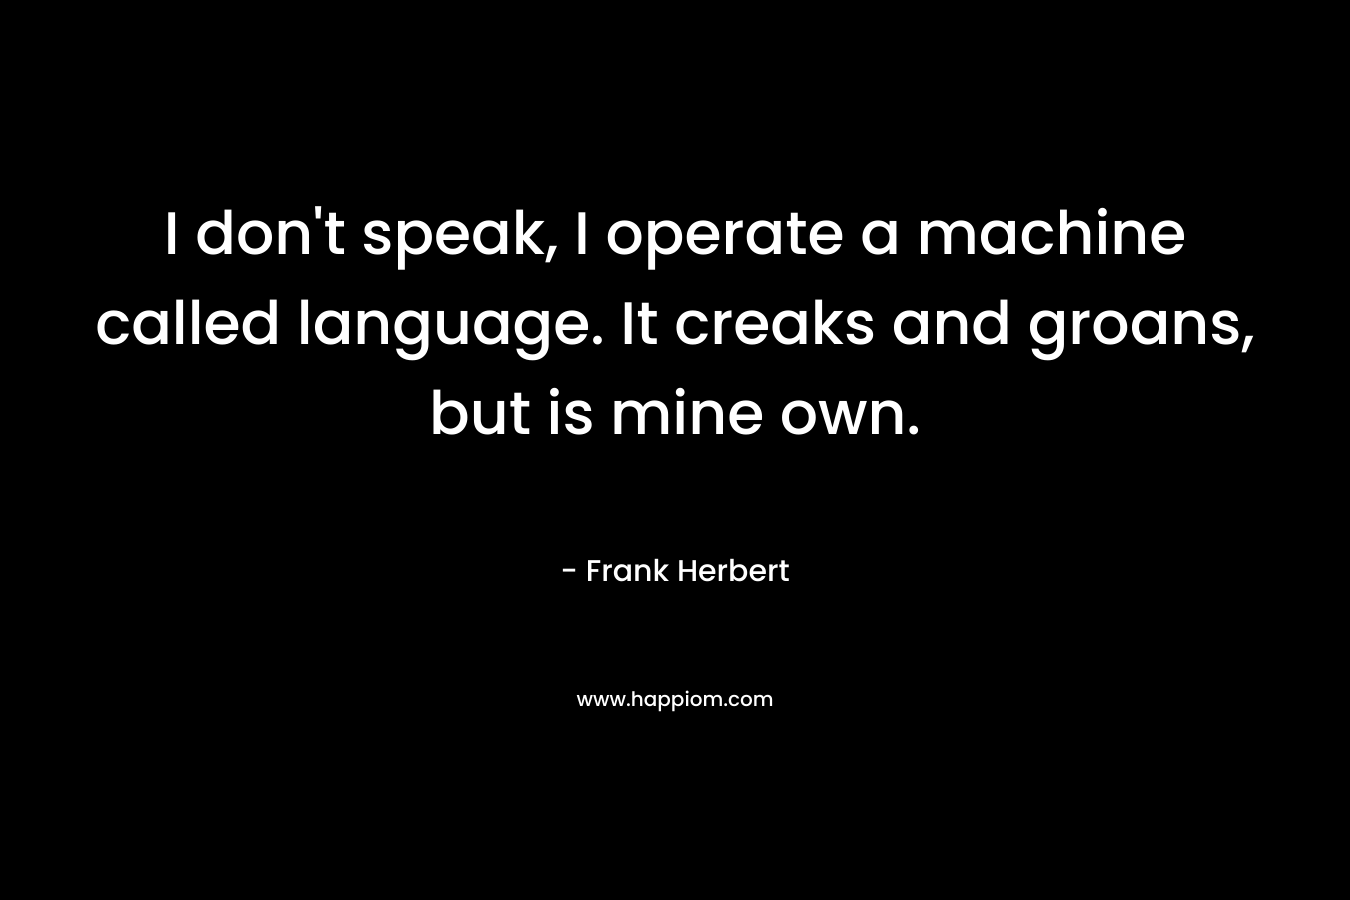 I don’t speak, I operate a machine called language. It creaks and groans, but is mine own. – Frank Herbert